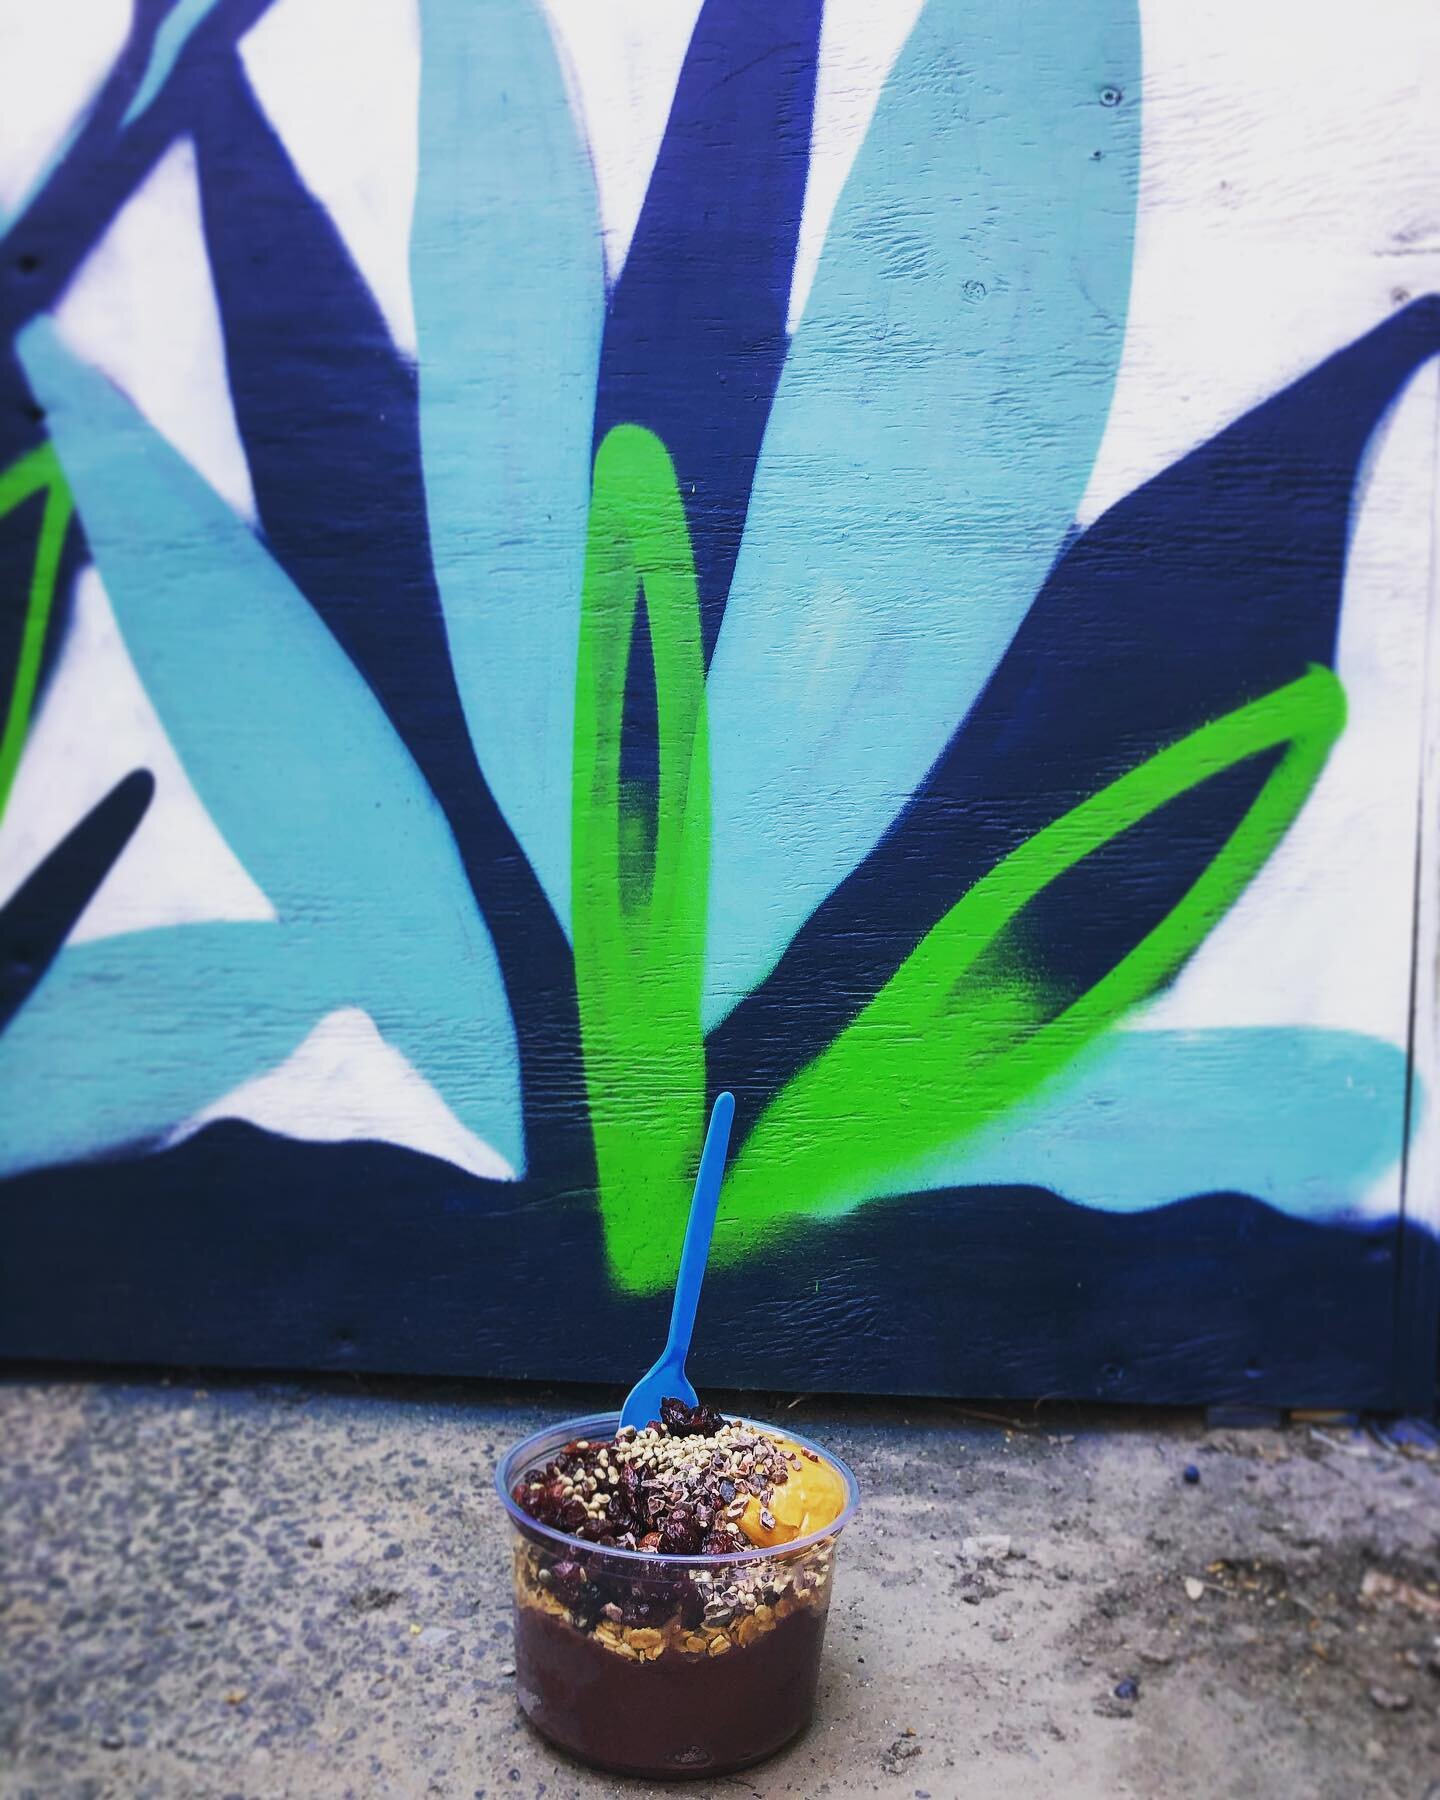 When Art meets Food 🦋

📍 EAST VILLAGE
💌 Catering: info@agavijuice.com
✨ 100% Raw 100% Vegan 100% Love
🏳️&zwj;🌈 Proudly serving organic acai bowls &amp; juices!
📸 Tag us in your #AGAVI photos!
.
.
AGAVI JUICE | NYC
#agavijuice 💚 #agavinyc
#agav